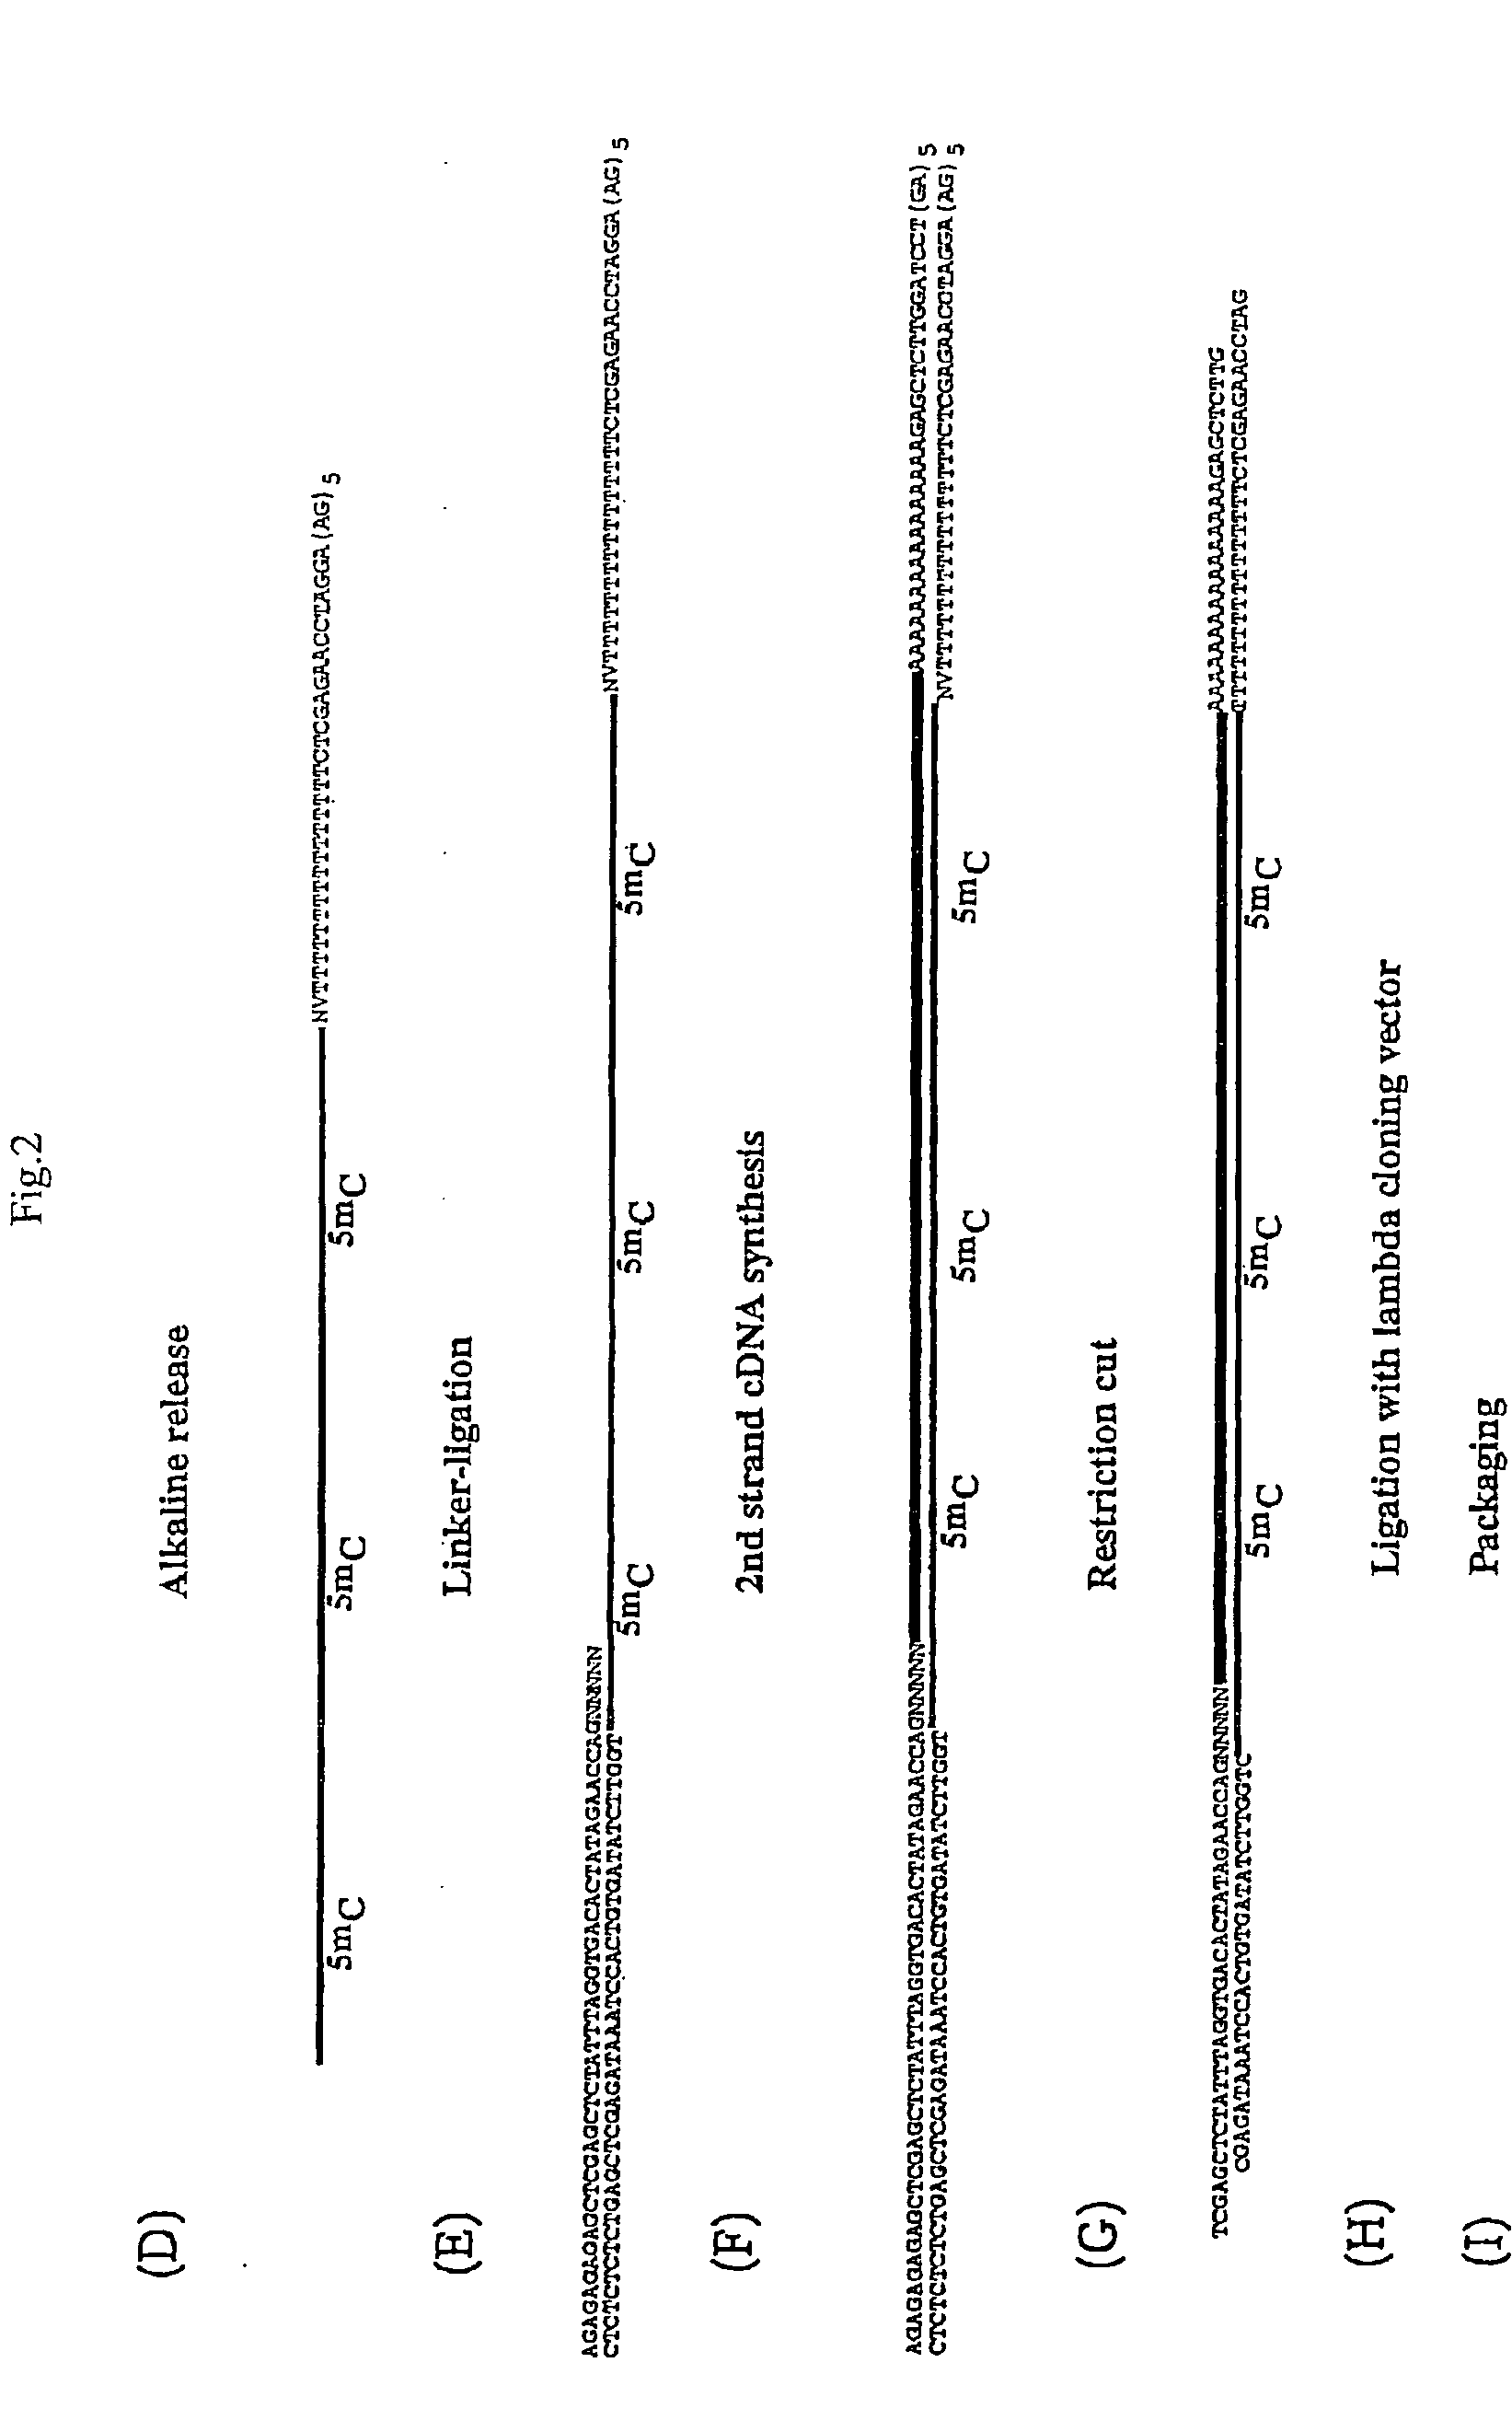 Oligonucleotide linkers comprising a variable cohesive portion and method for the preparation of polynucleotide libraries by using said linkers